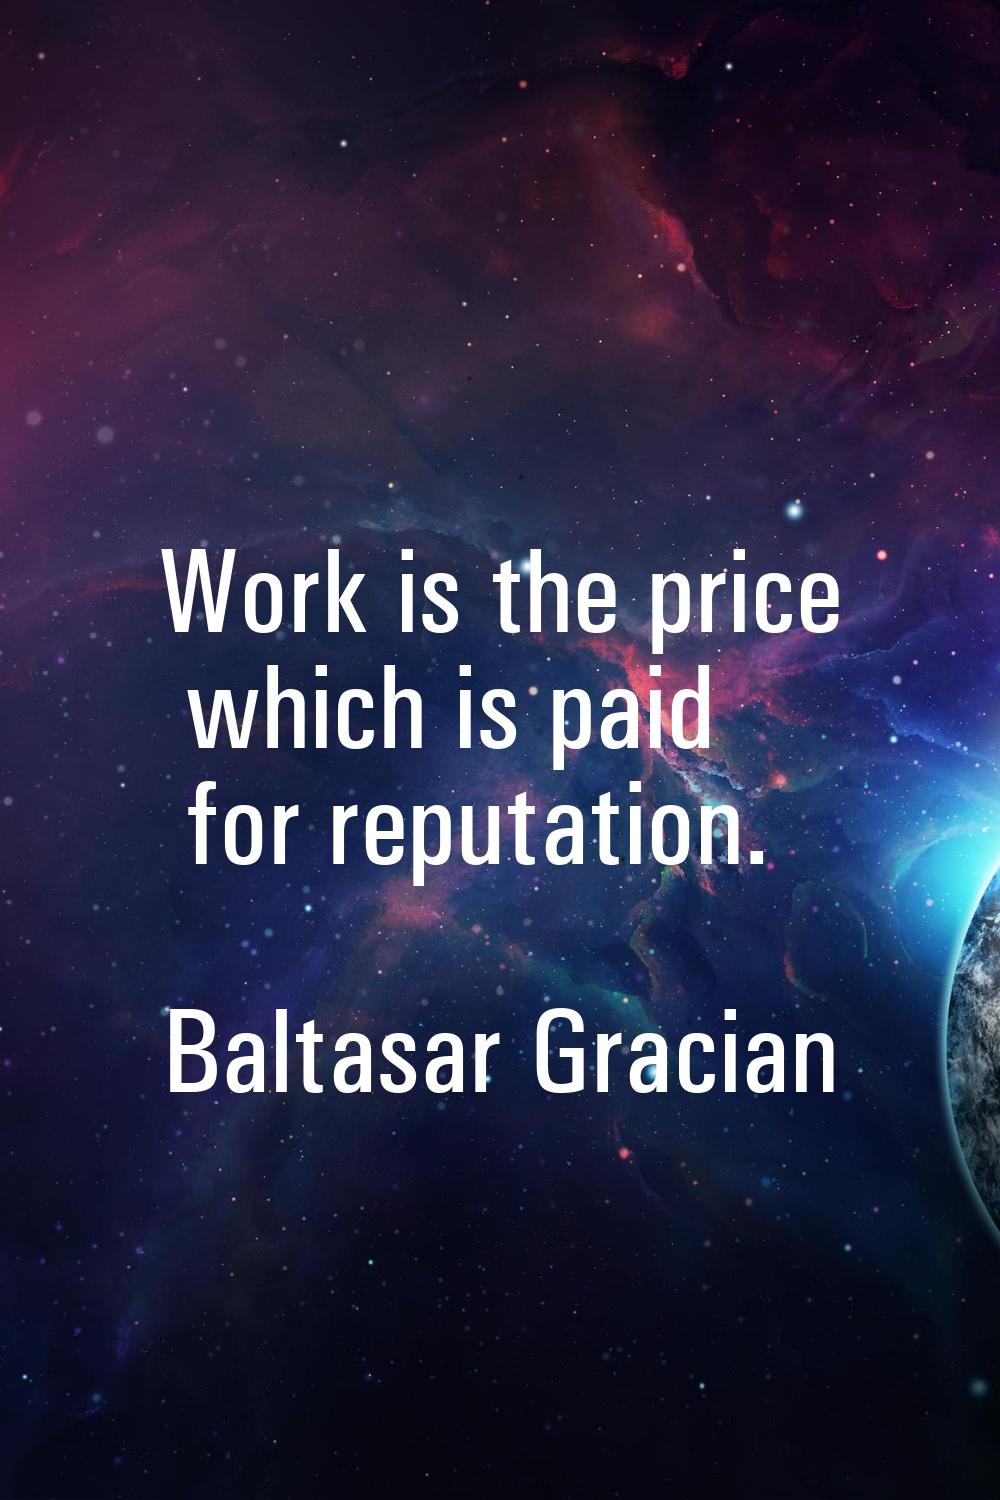 Work is the price which is paid for reputation.